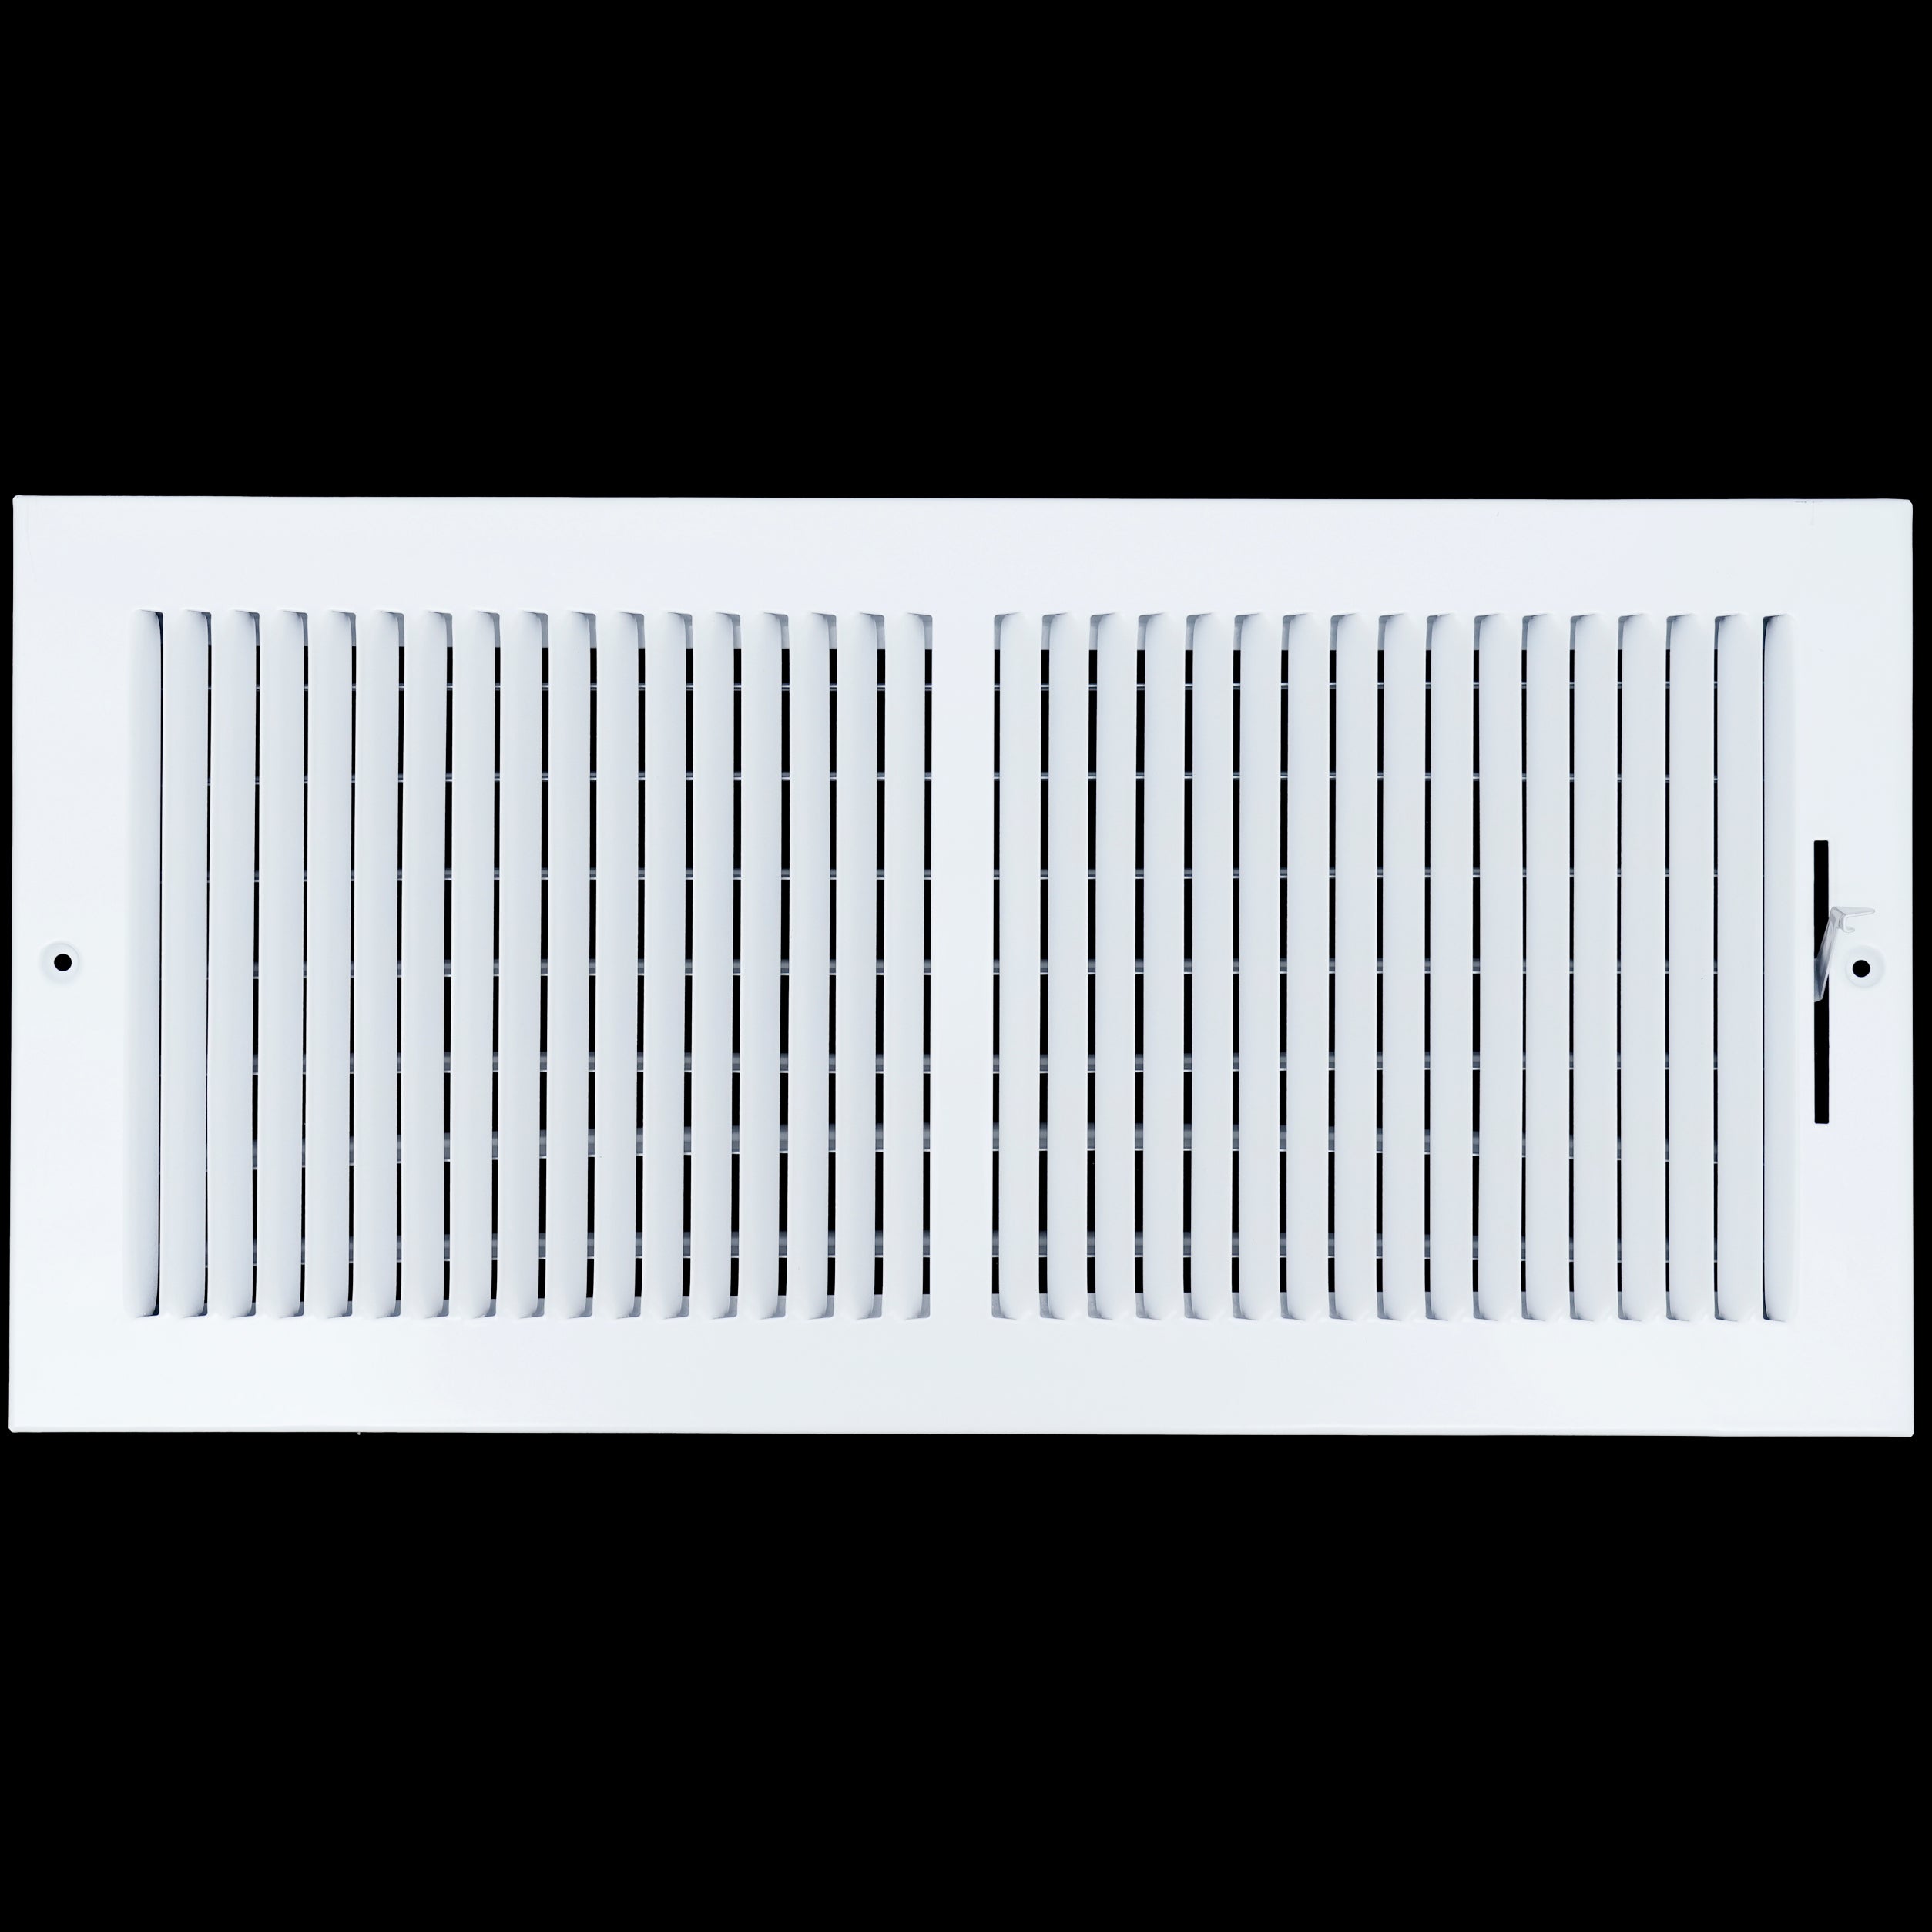 airgrilles 18 x 8 duct opening   2 way steel air supply diffuser for sidewall and ceiling hnd-asg-wh-2way-18x8 764613097702 - 1